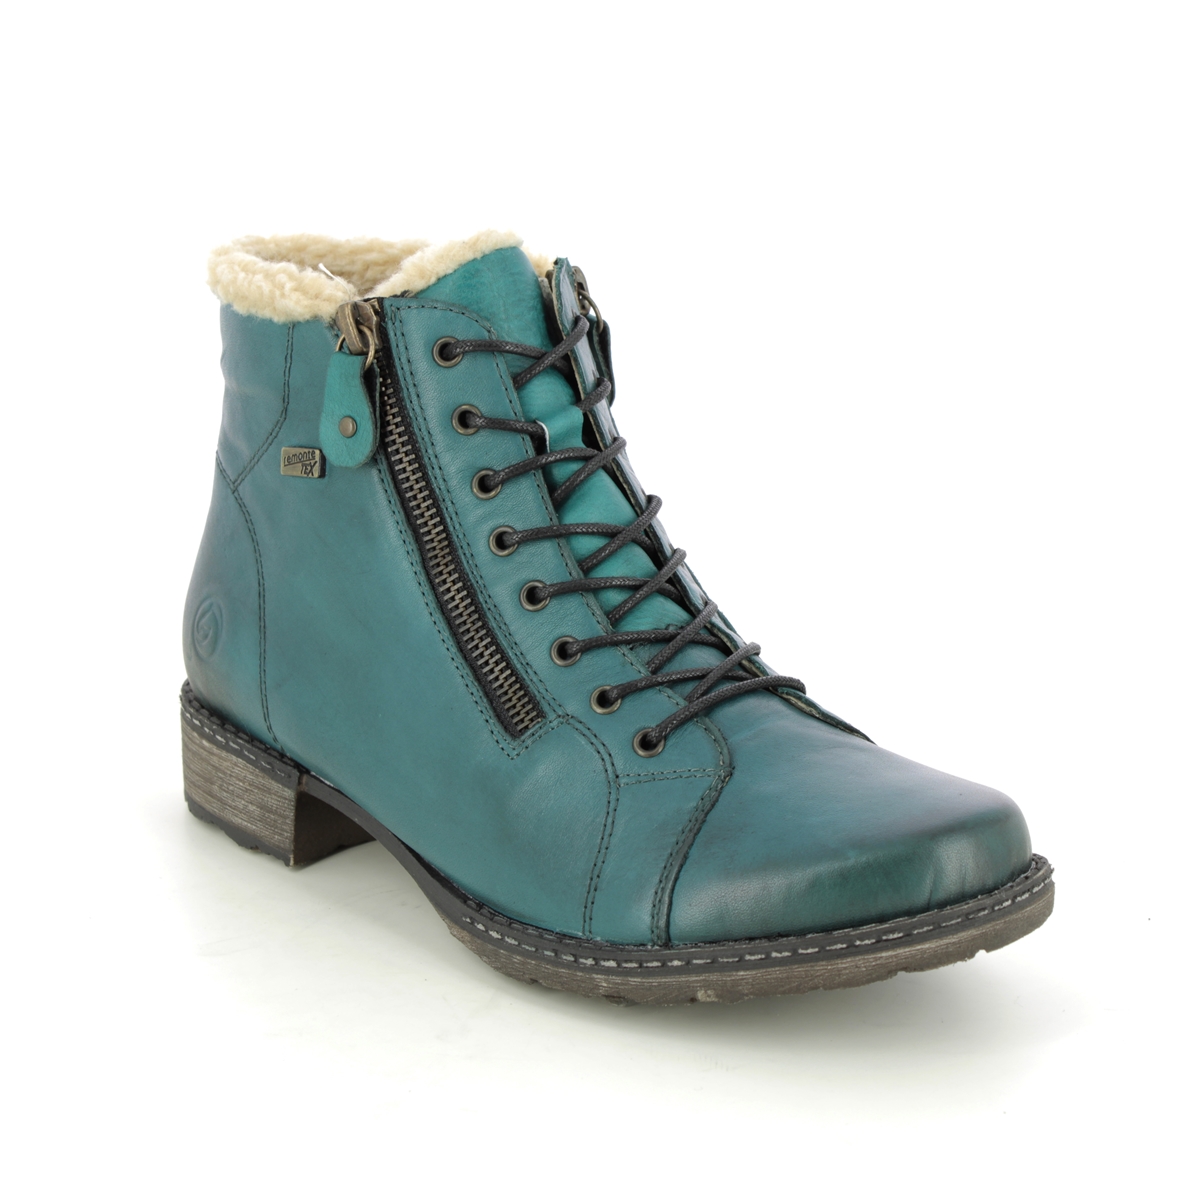 Remonte Peesienna Tex Turquoise Leather Womens Lace Up Boots D4372-12 In Size 42 In Plain Turquoise Leather